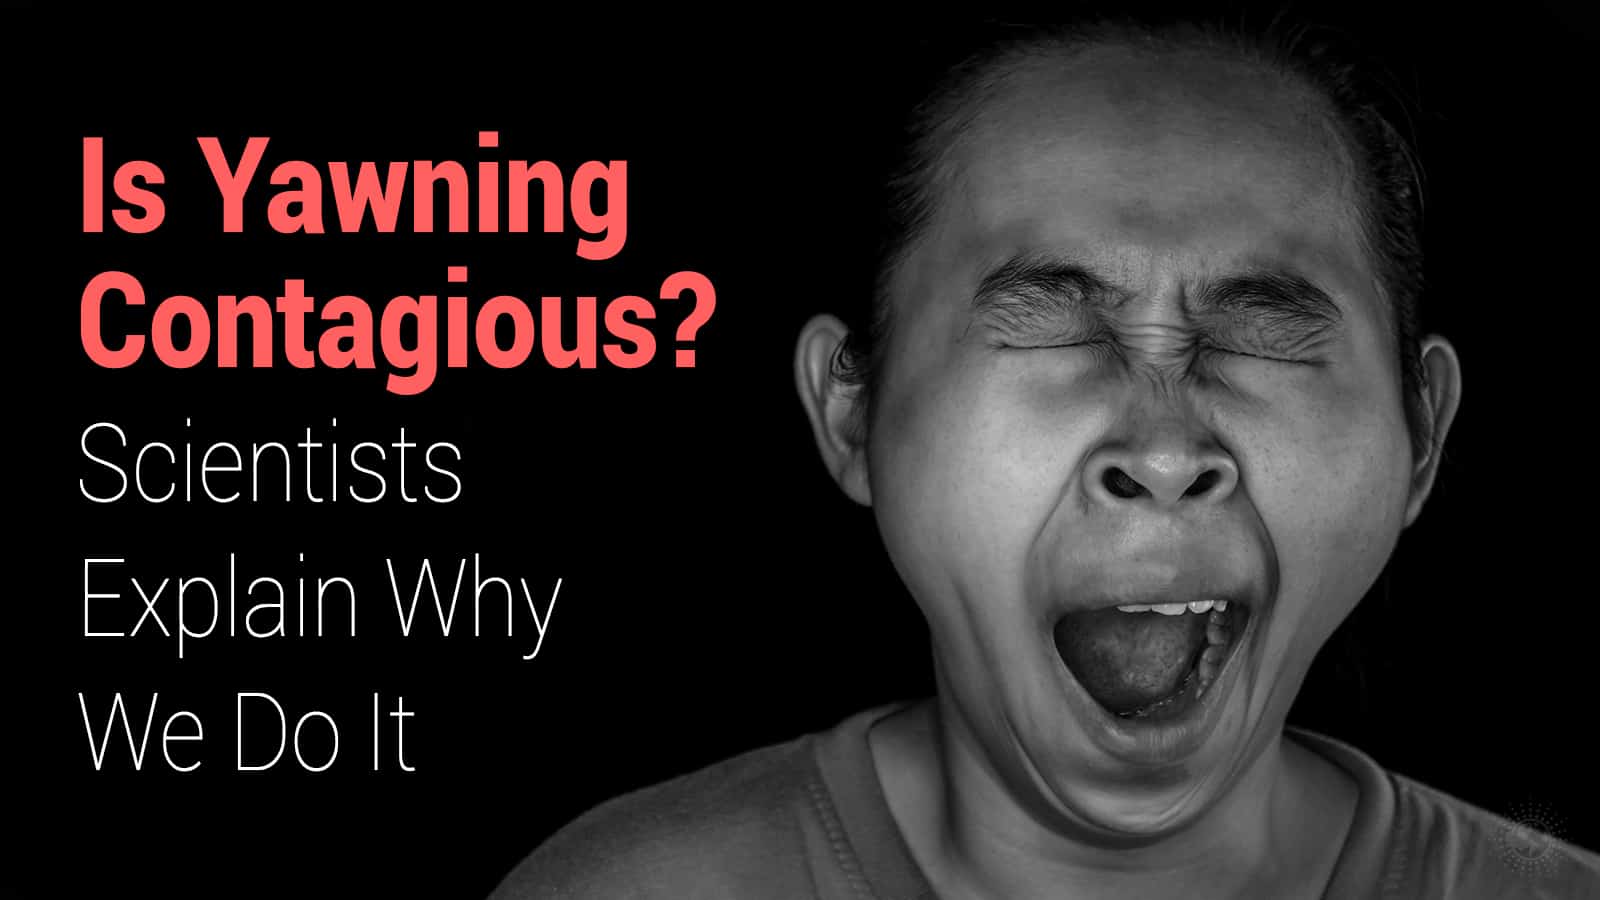 Is Yawning Contagious? Scientists Explain Why We Do It